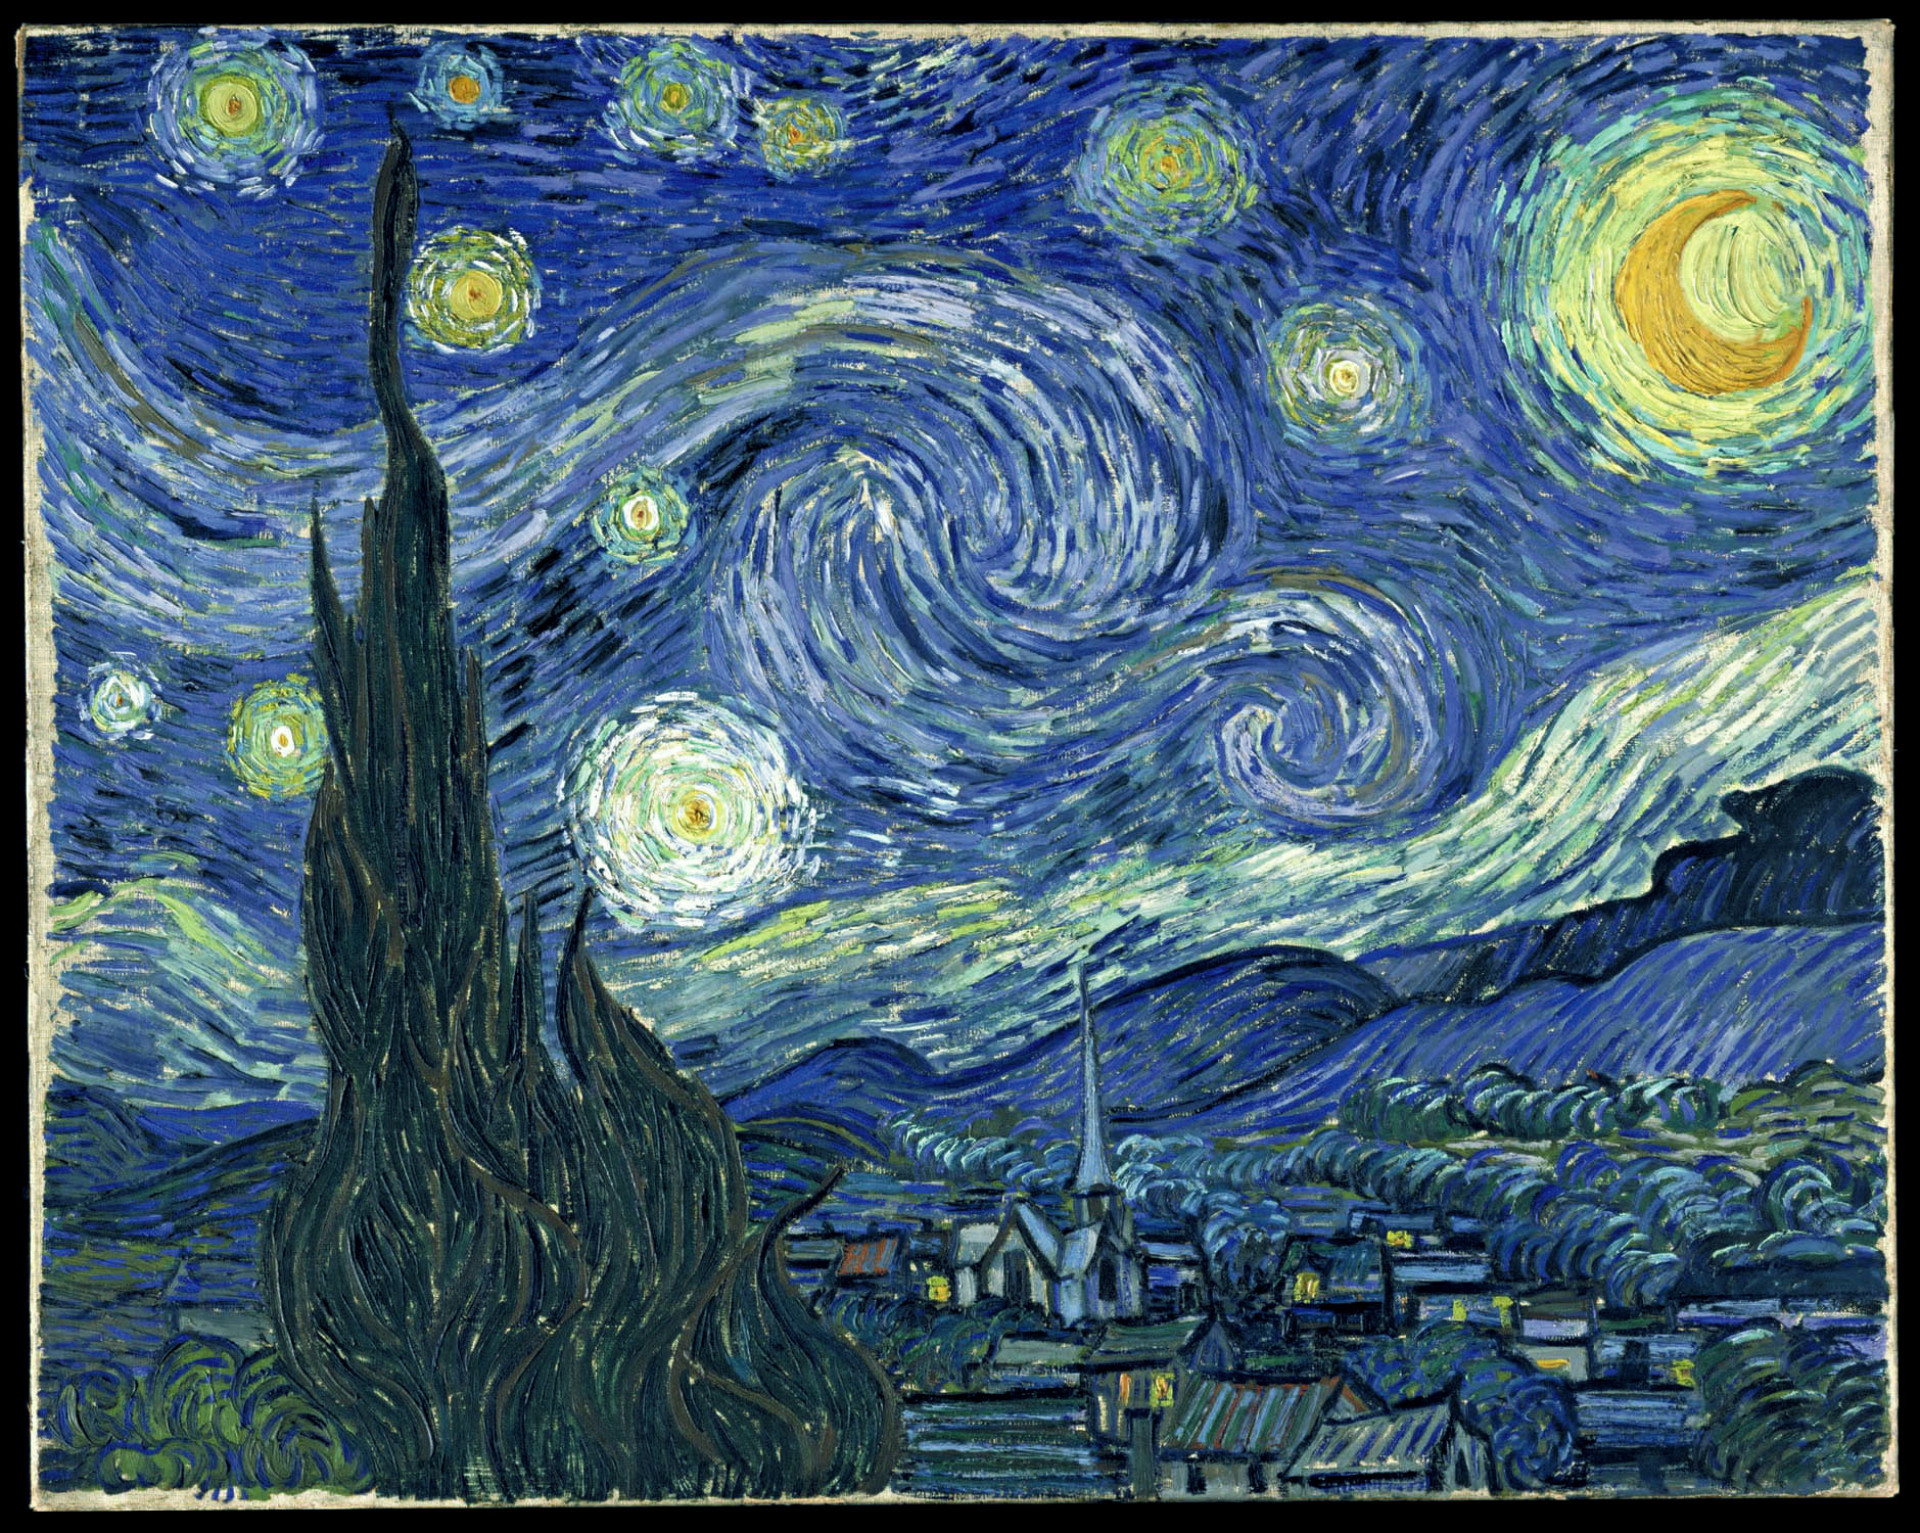 <p>According to researchers, Van Gogh was able to portray the complex concept of turbulent flow in his painting, which is considered one of the most challenging ideas in physics and mathematics. </p>